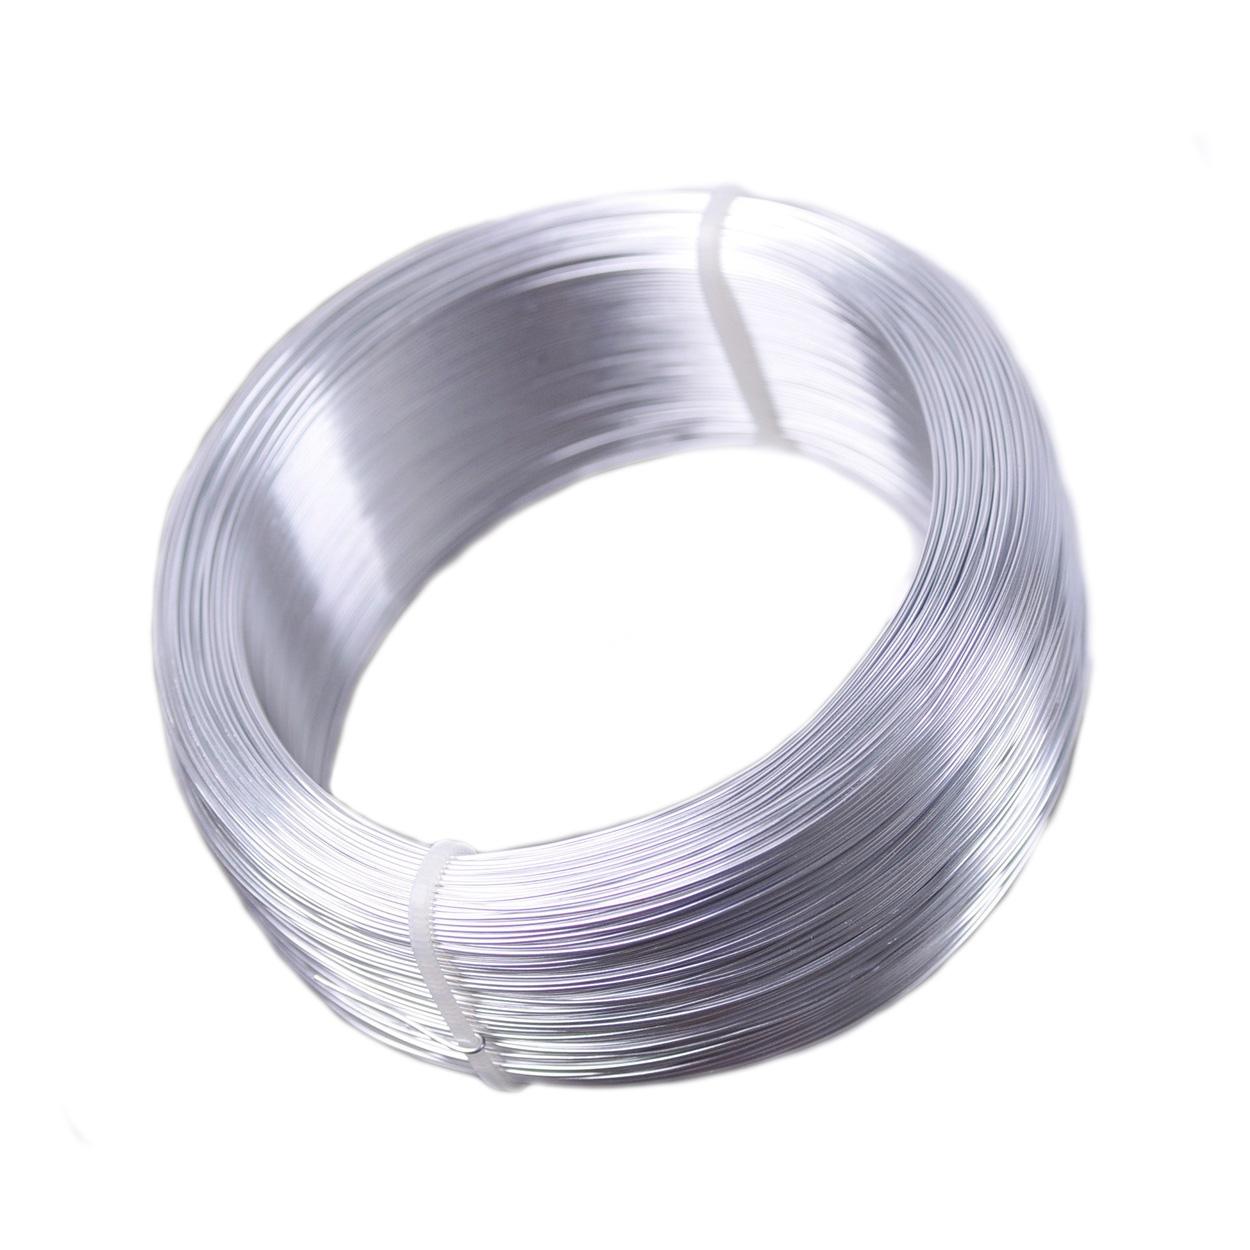 

Polish 1 Large Roll 200 meters Silver Plated Color 0.6mm 0.7mm Aluminium Soft Metal Beading Wire for Jewelry Making DIY Crafts